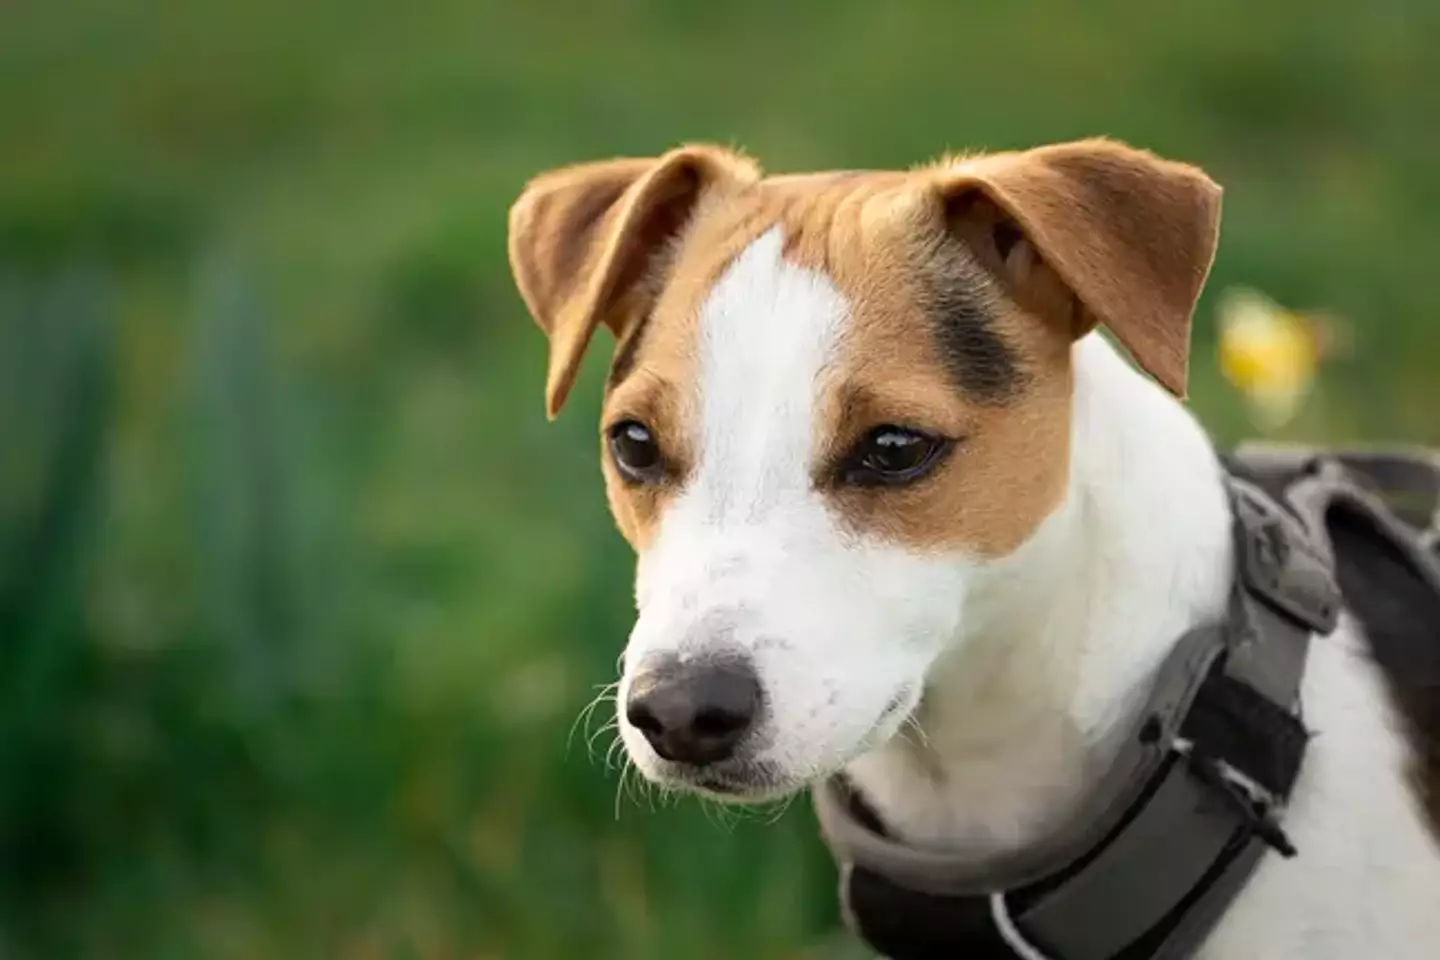 Jack Russell terriers have become one of the most in demand breeds among 'dognappers' (